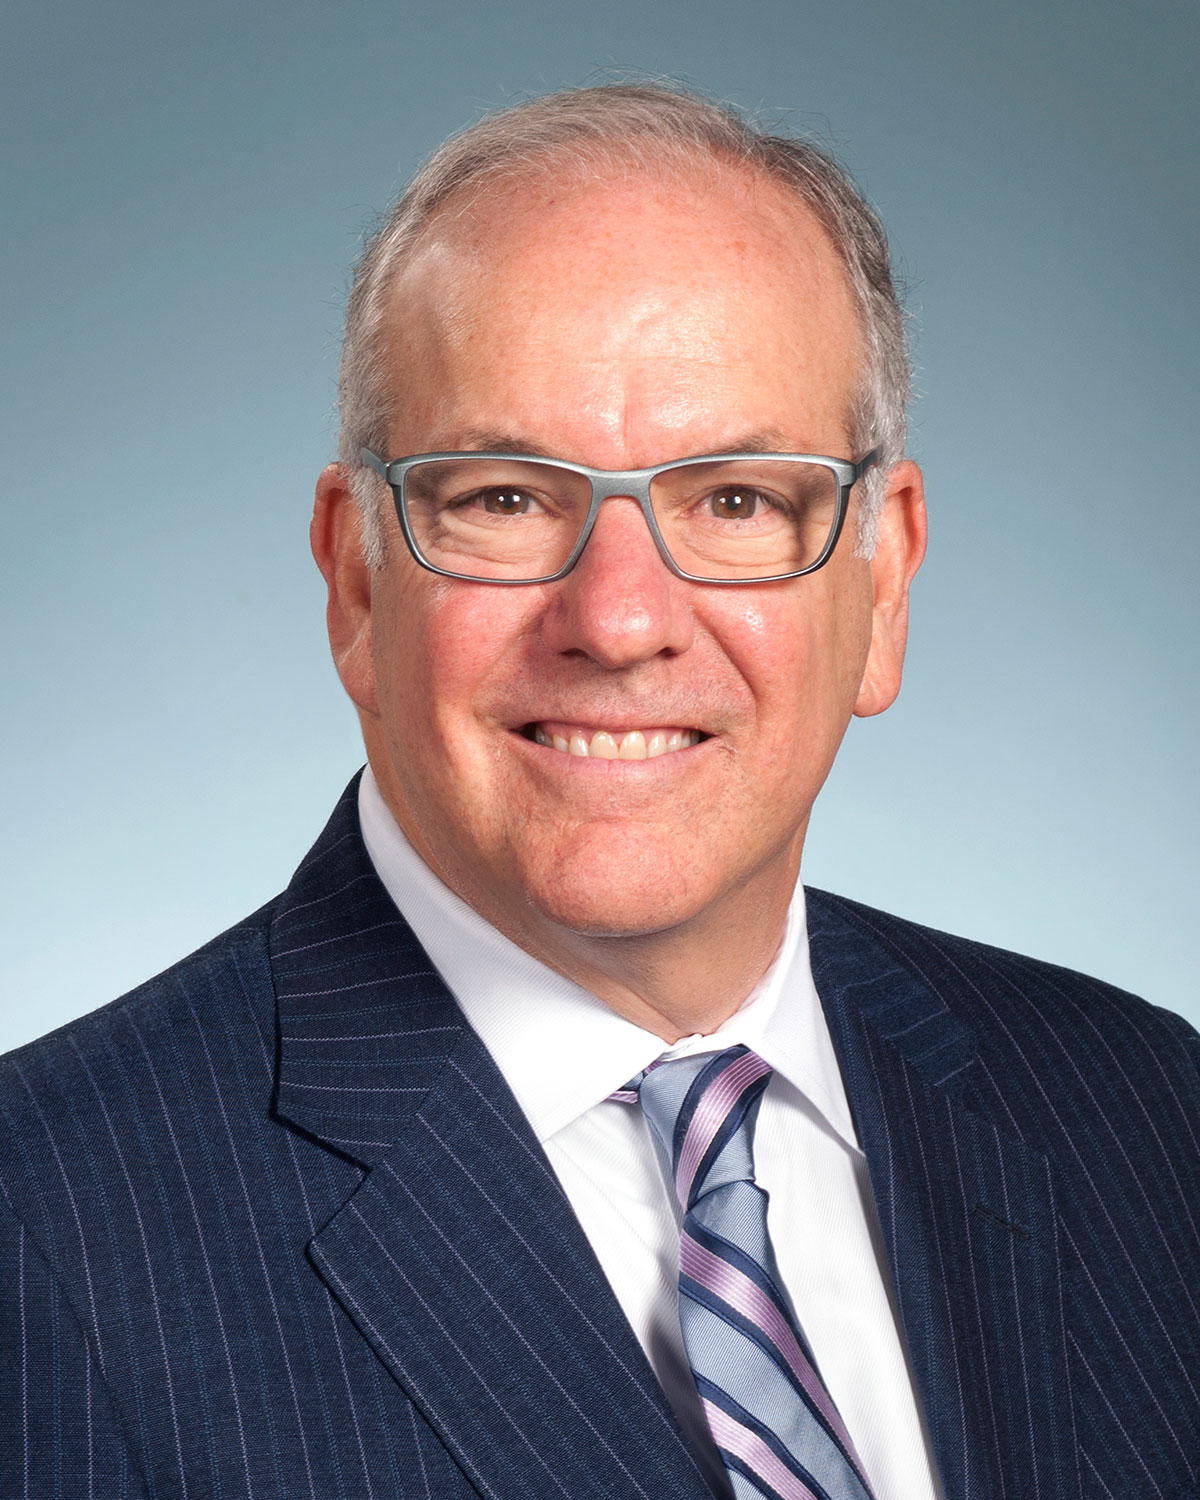 Professional headshot photograph of PCOM President and CEO Jay Feldstein, DO, wearing a suit